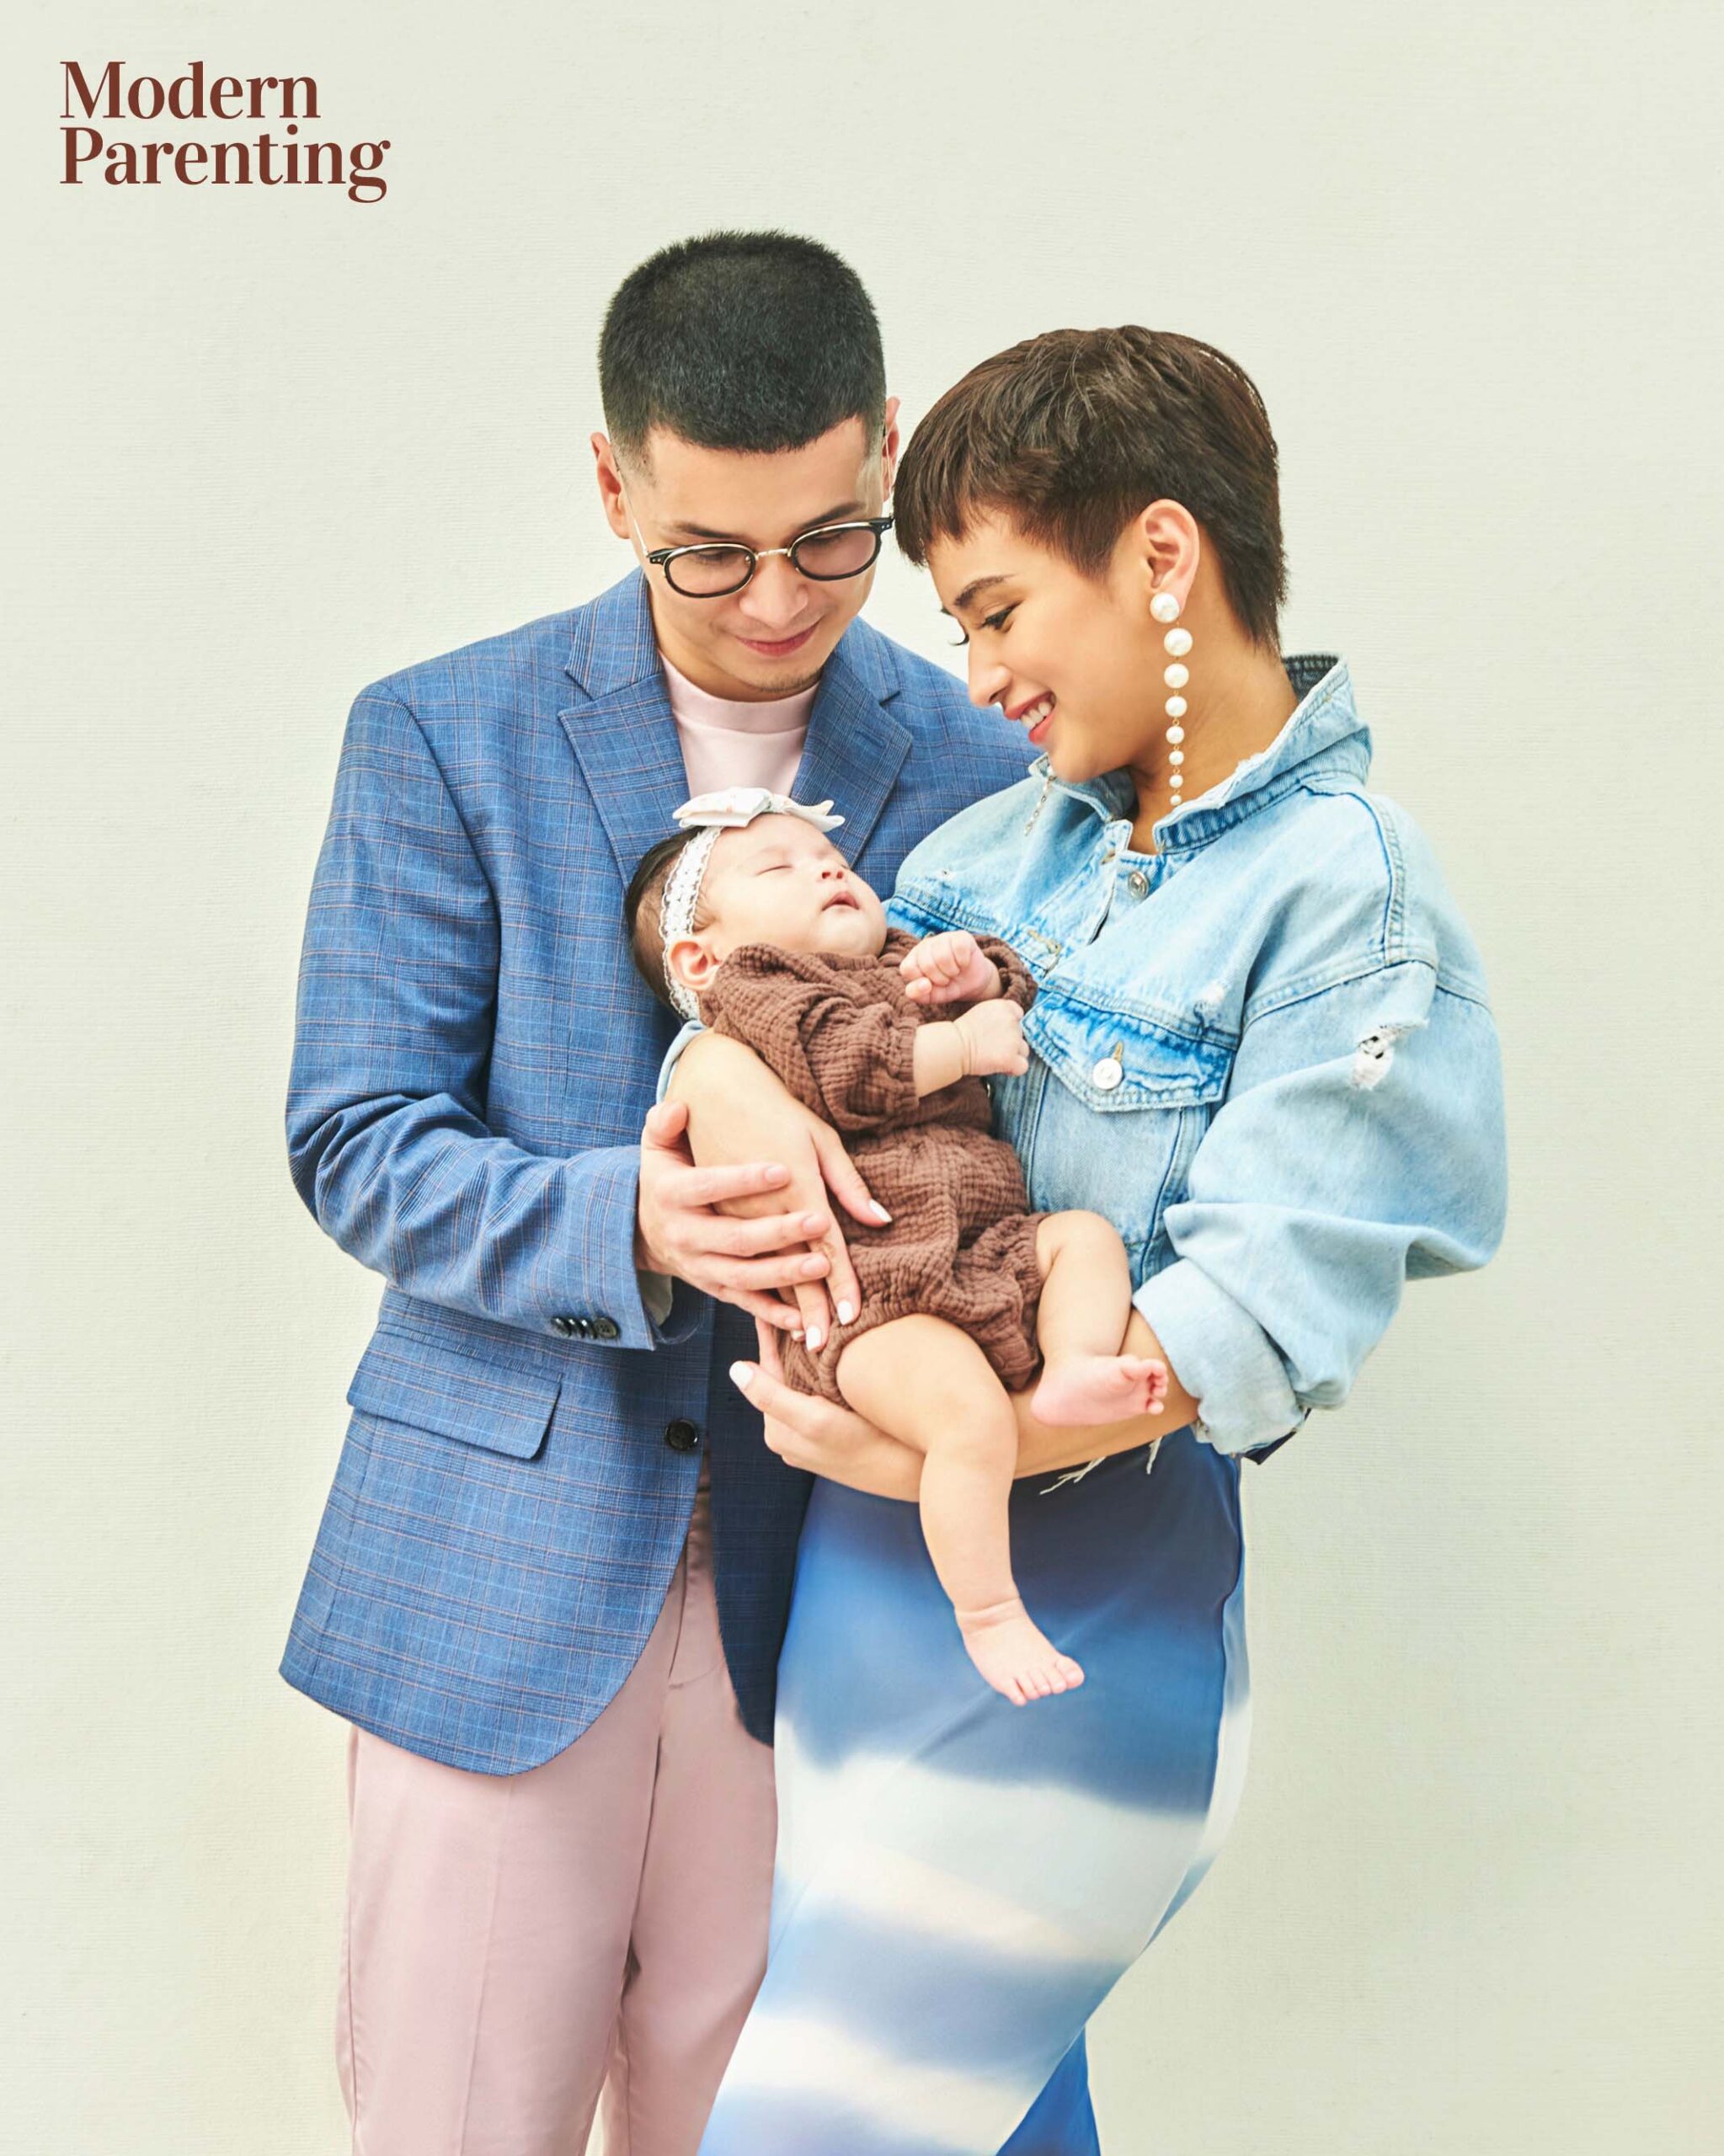 Patrick Sugui and Aeriel Garcia Sugui with Olivia for Modern Parenting